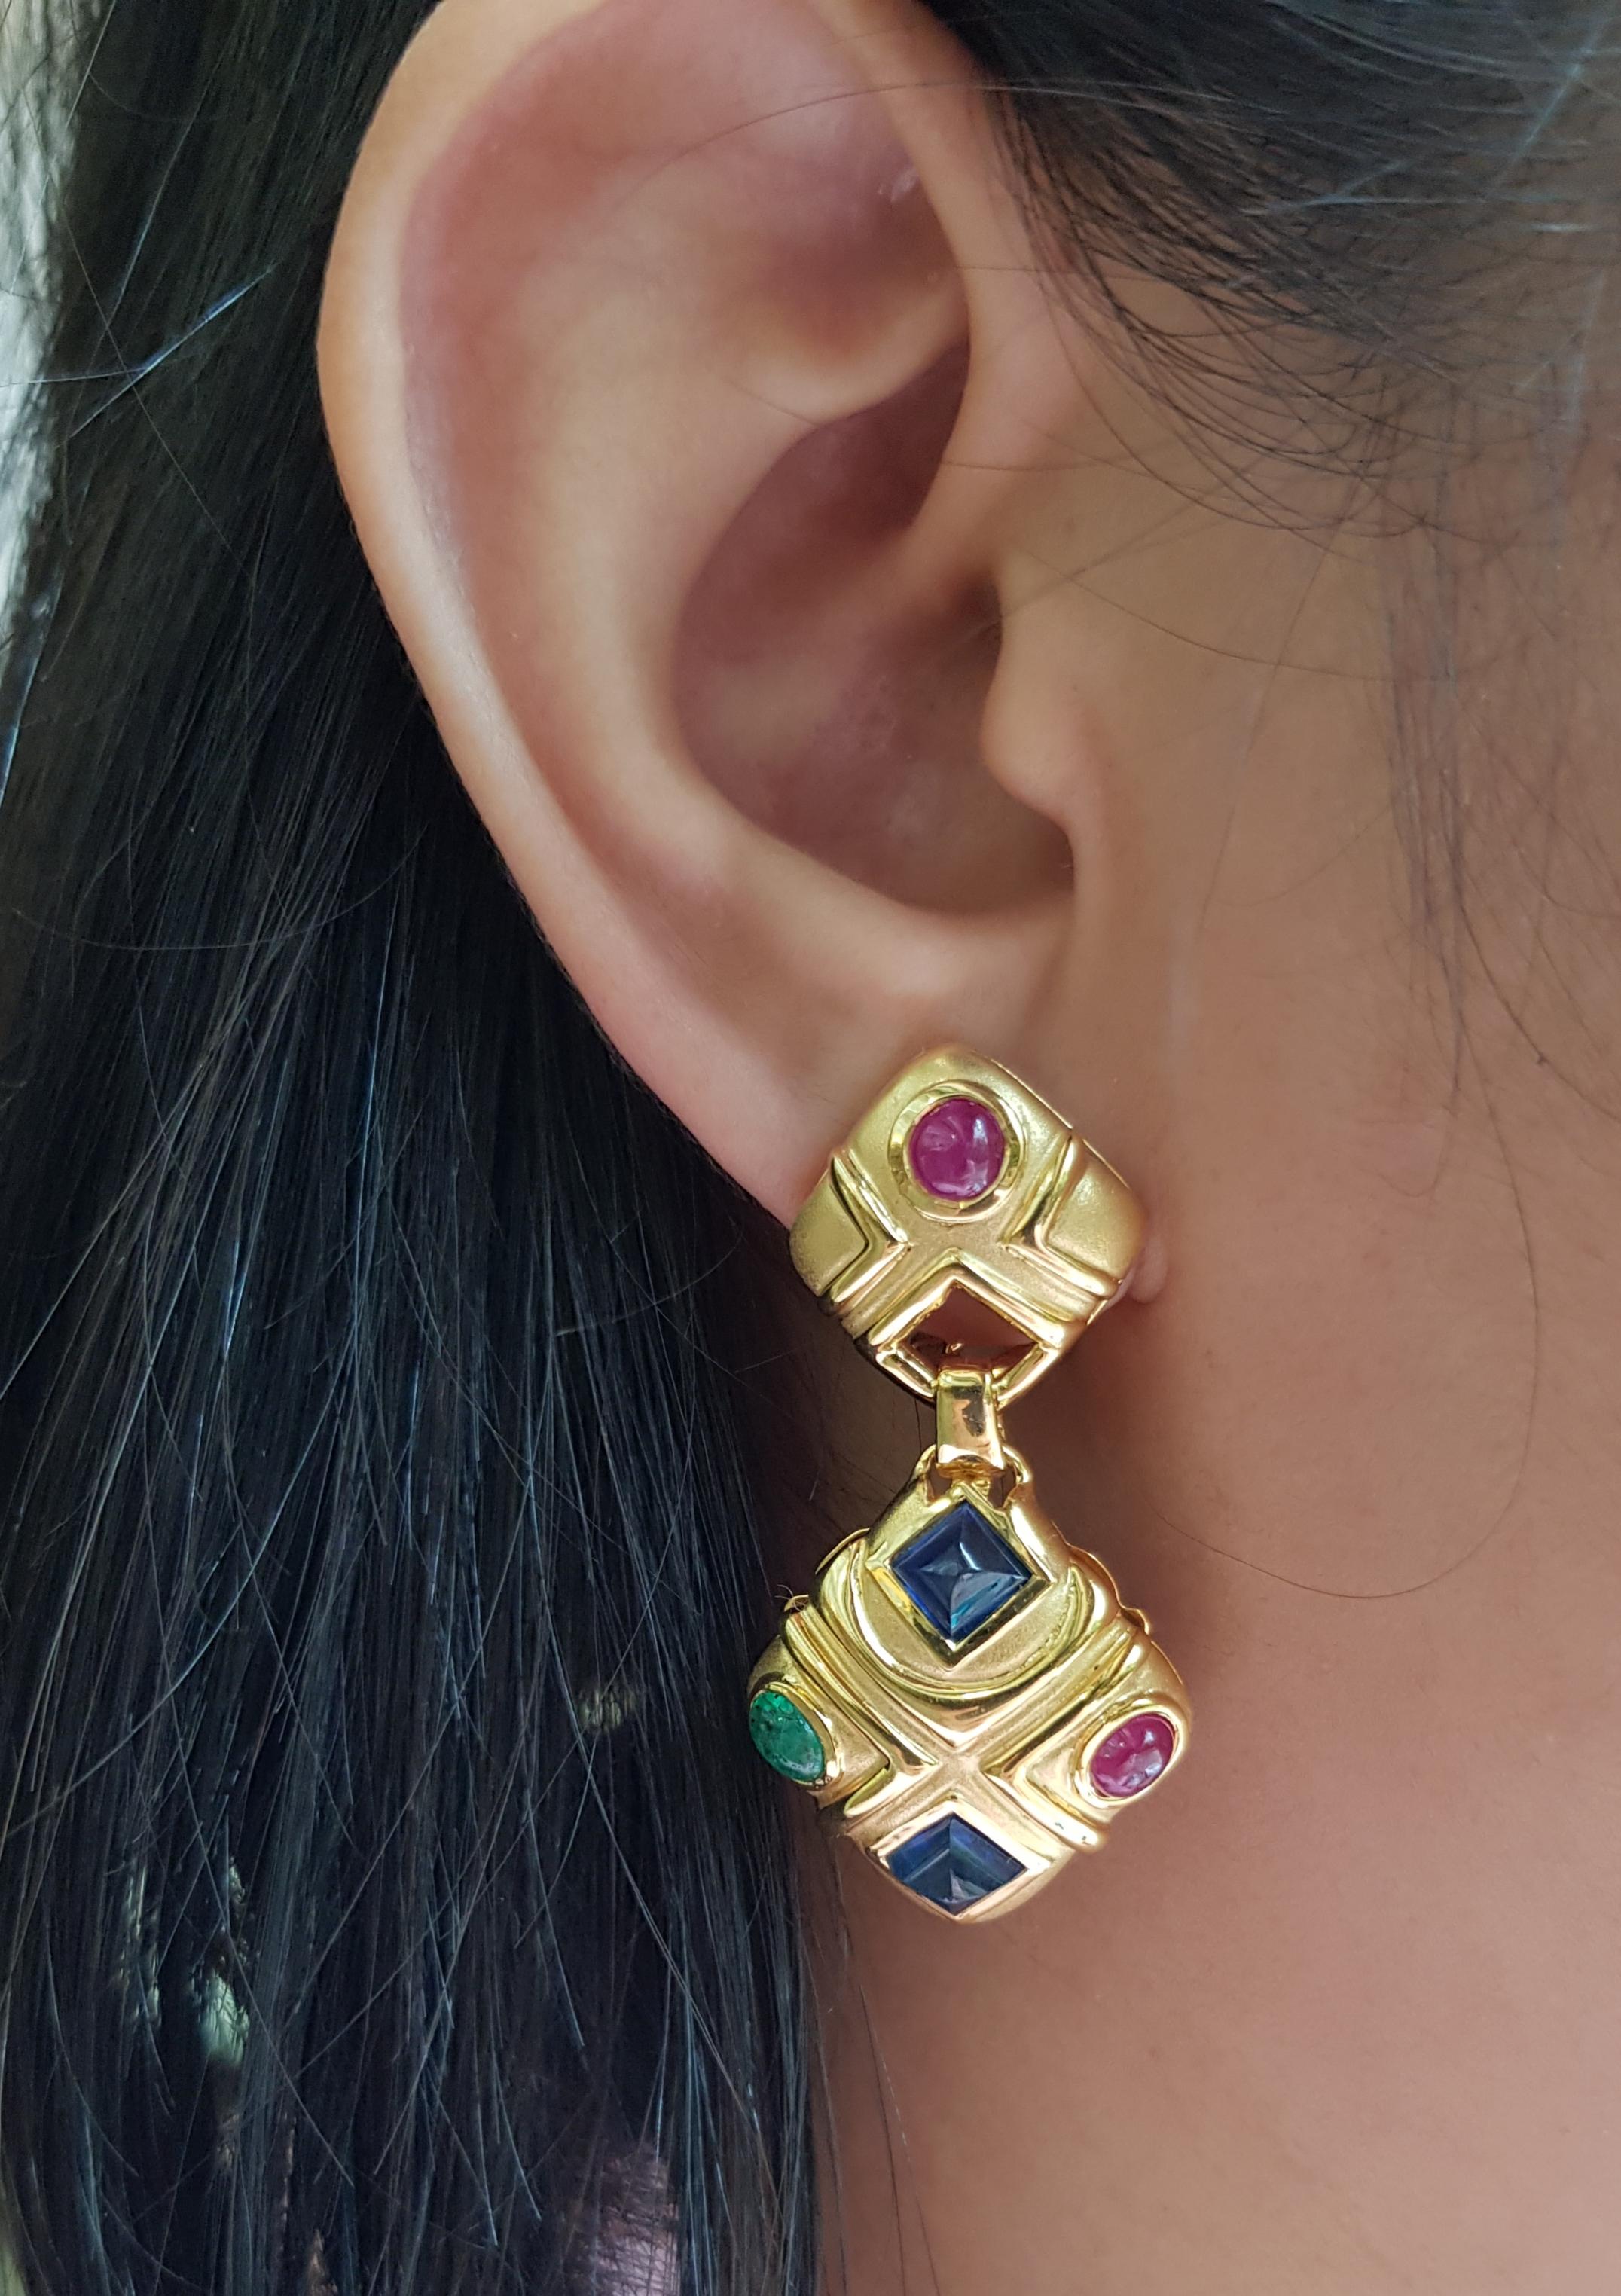 Cabochon Blue Sapphire 4.70 carats, Cabochon Ruby 2.11 carats and Cabochon Emerald 0.72 carat Earrings set in 18 Karat Gold Settings

Width:  2.3 cm 
Length: 4.4 cm
Total Weight: 26.57 grams

